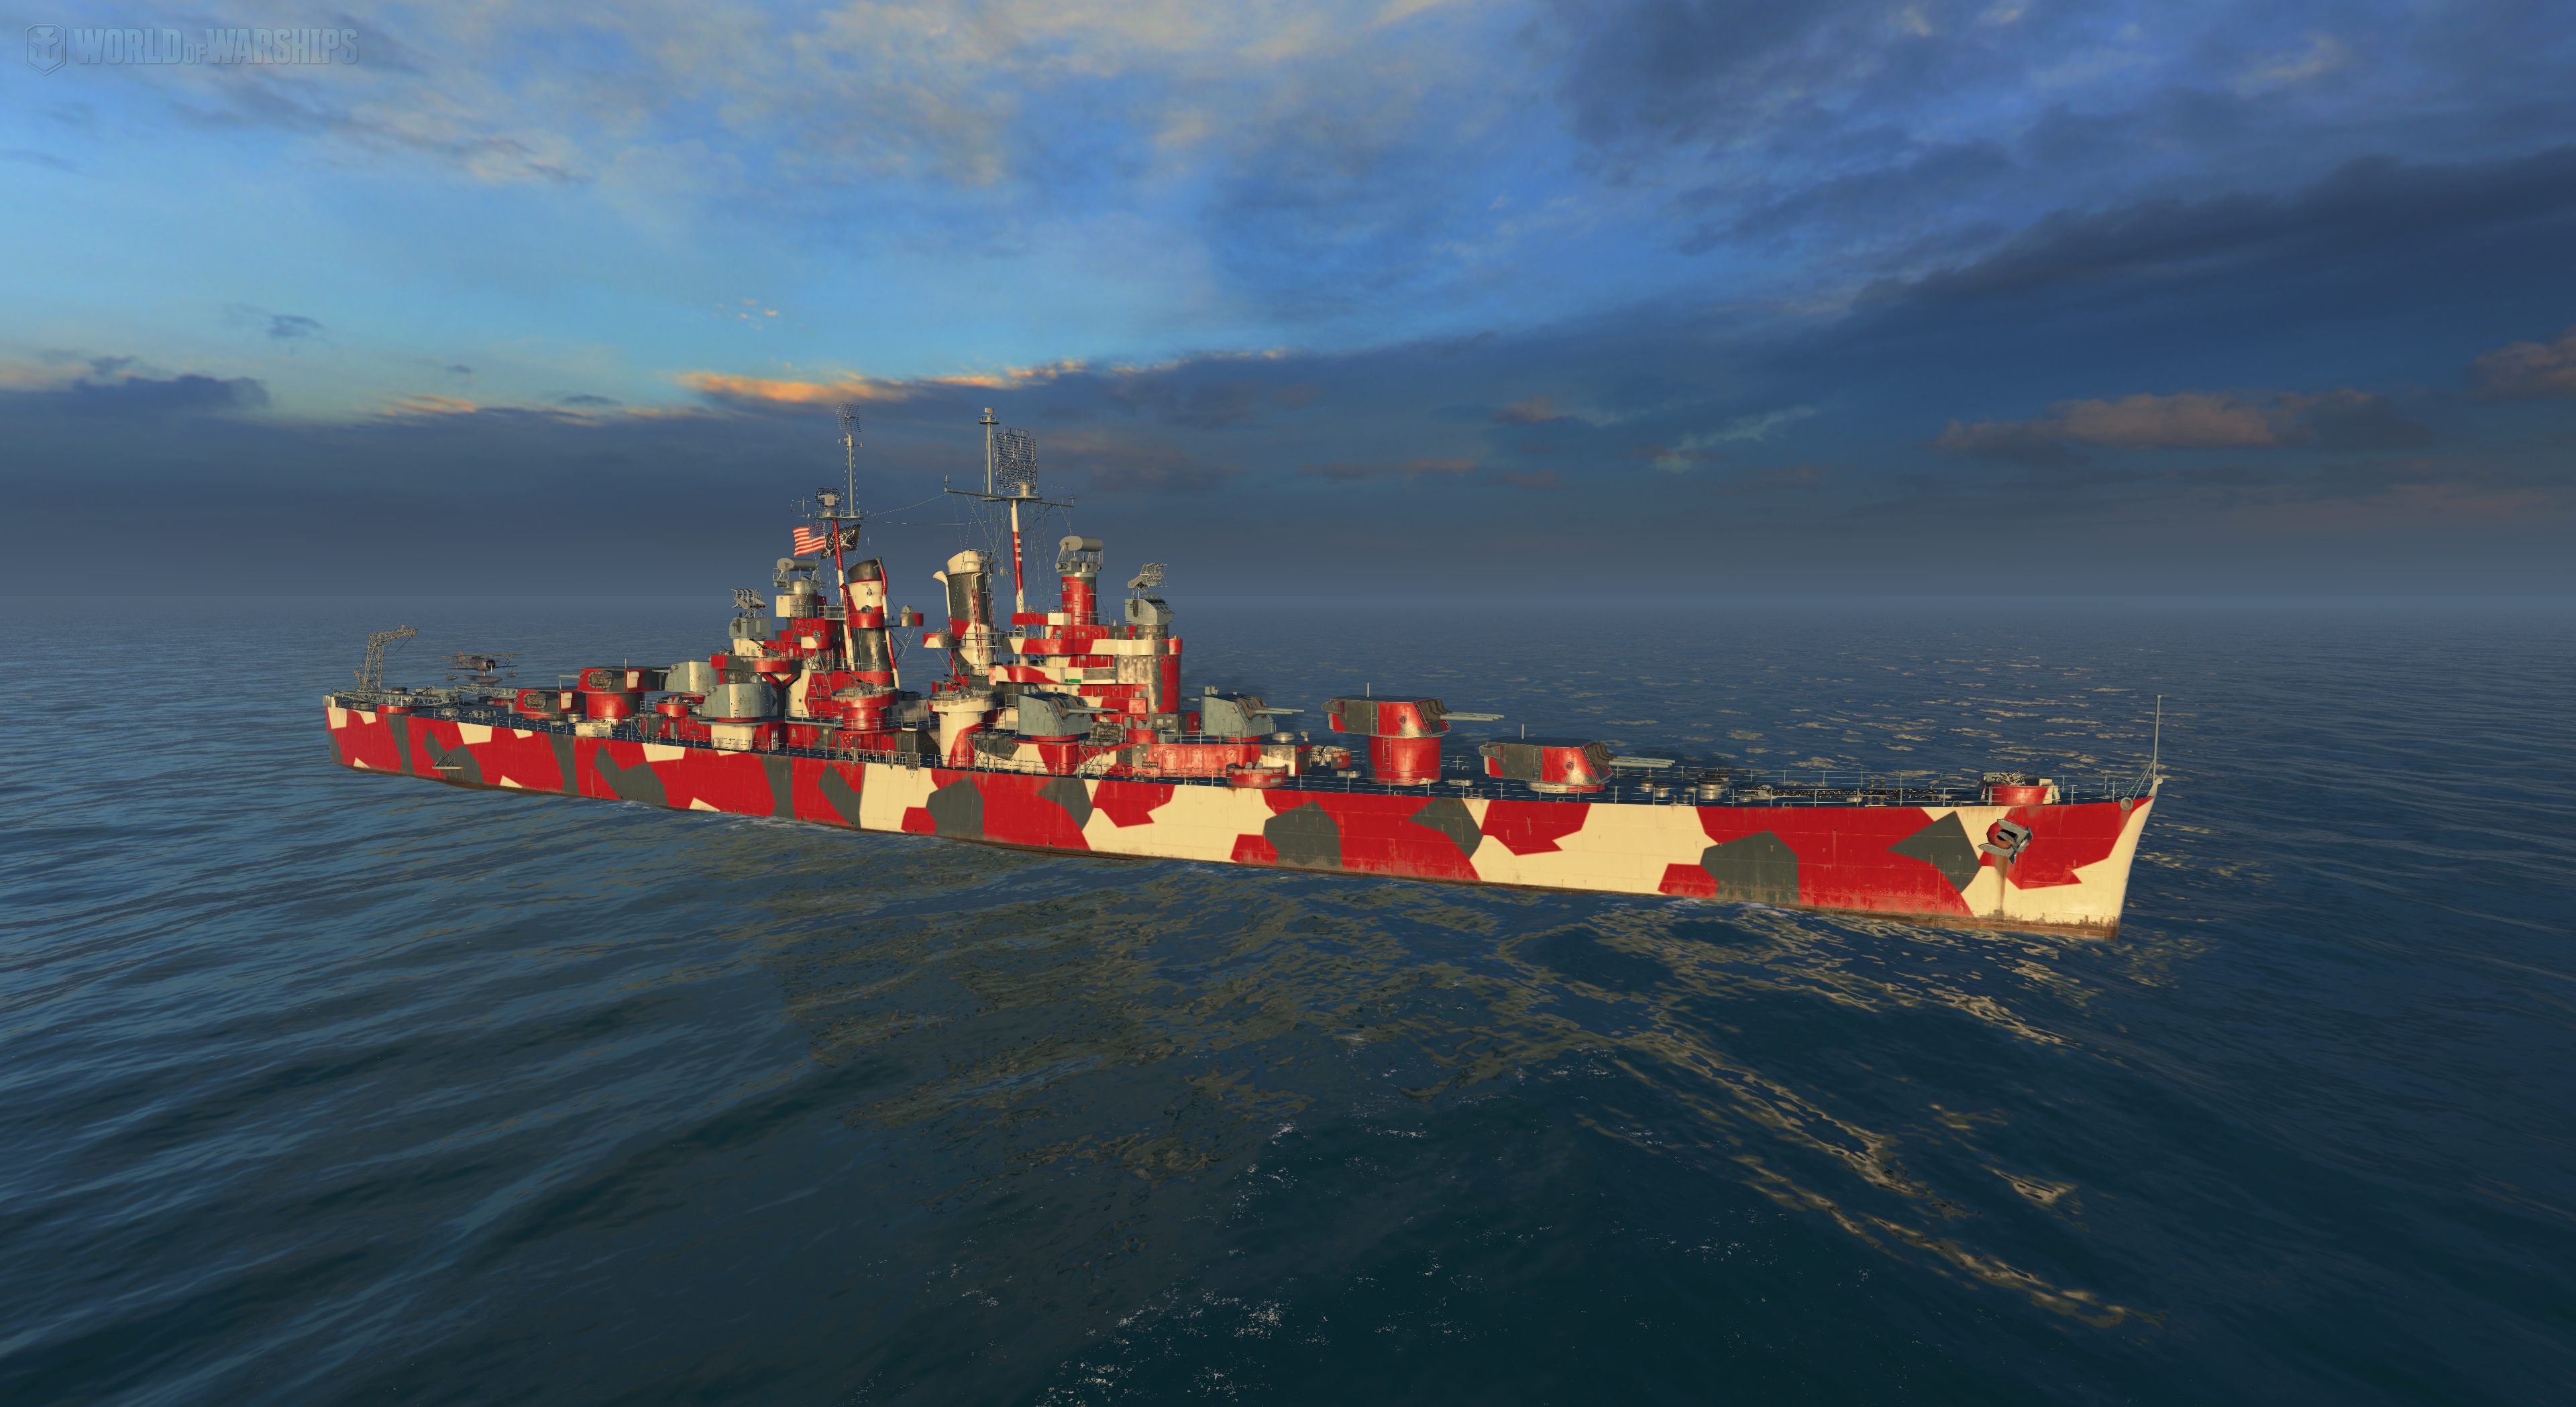 world of warships new orleans camouflage